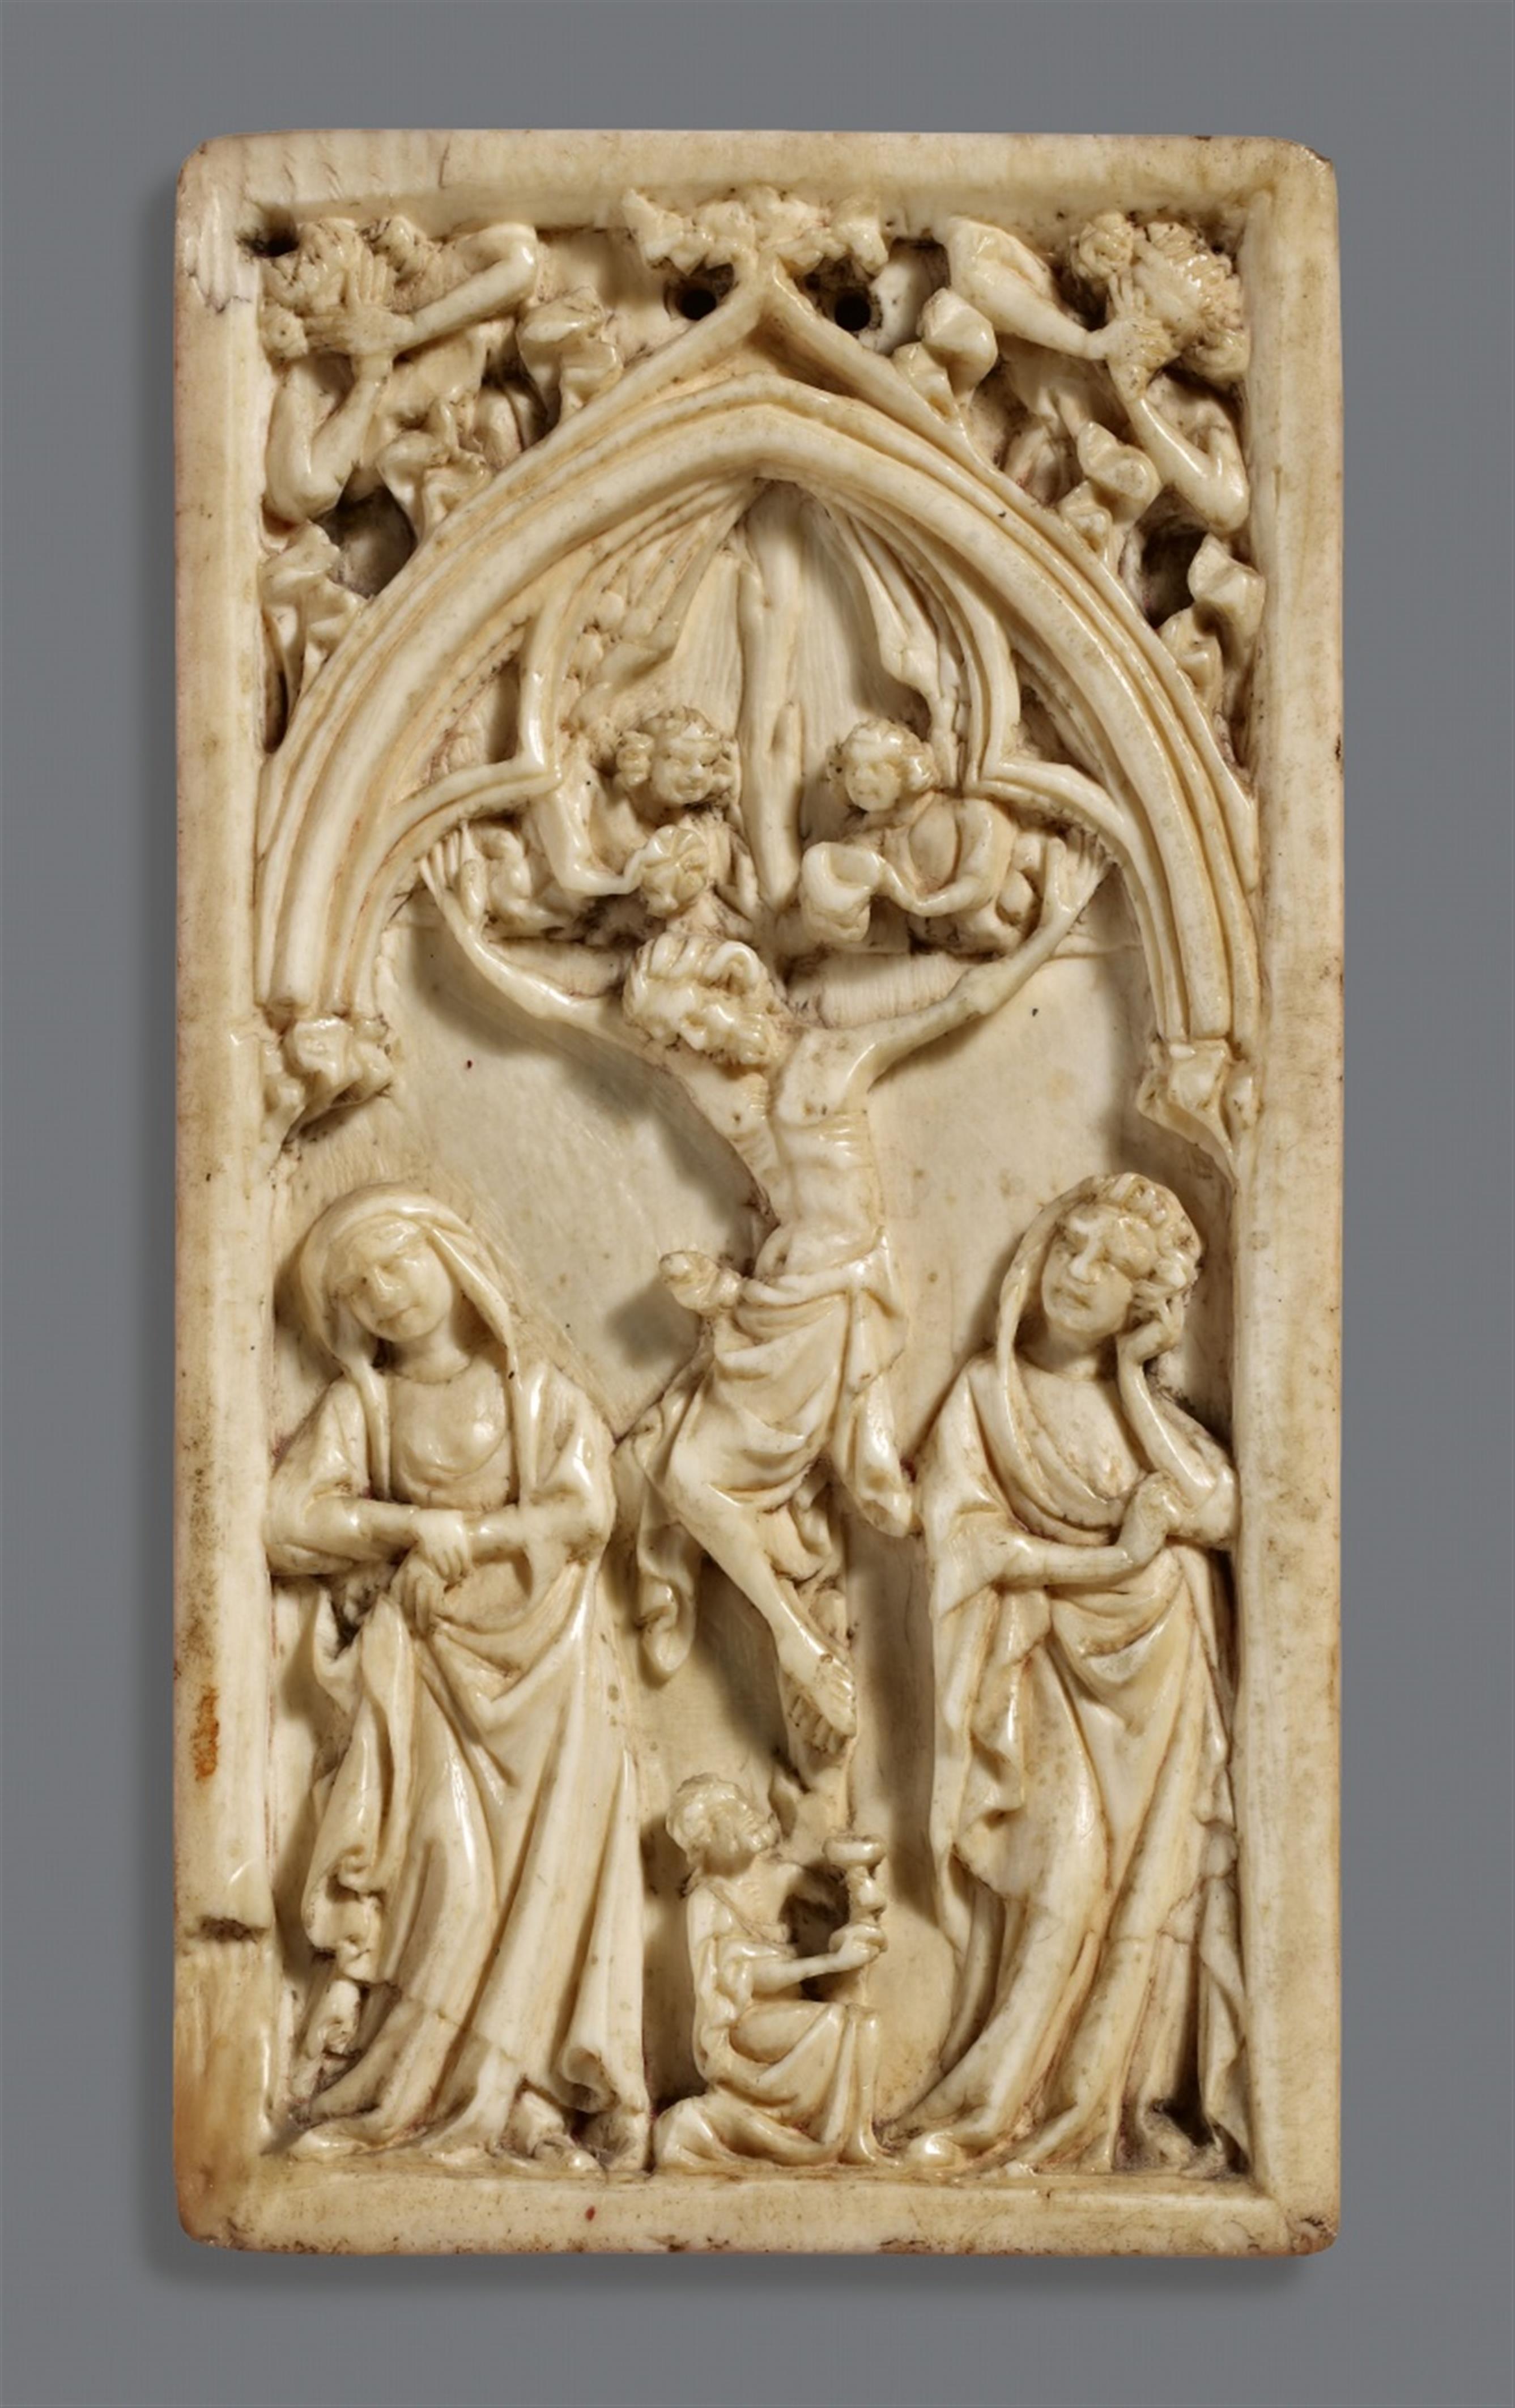 Northern France 14th century - A 14th century Northern French carved ivory crucifixion group - image-1